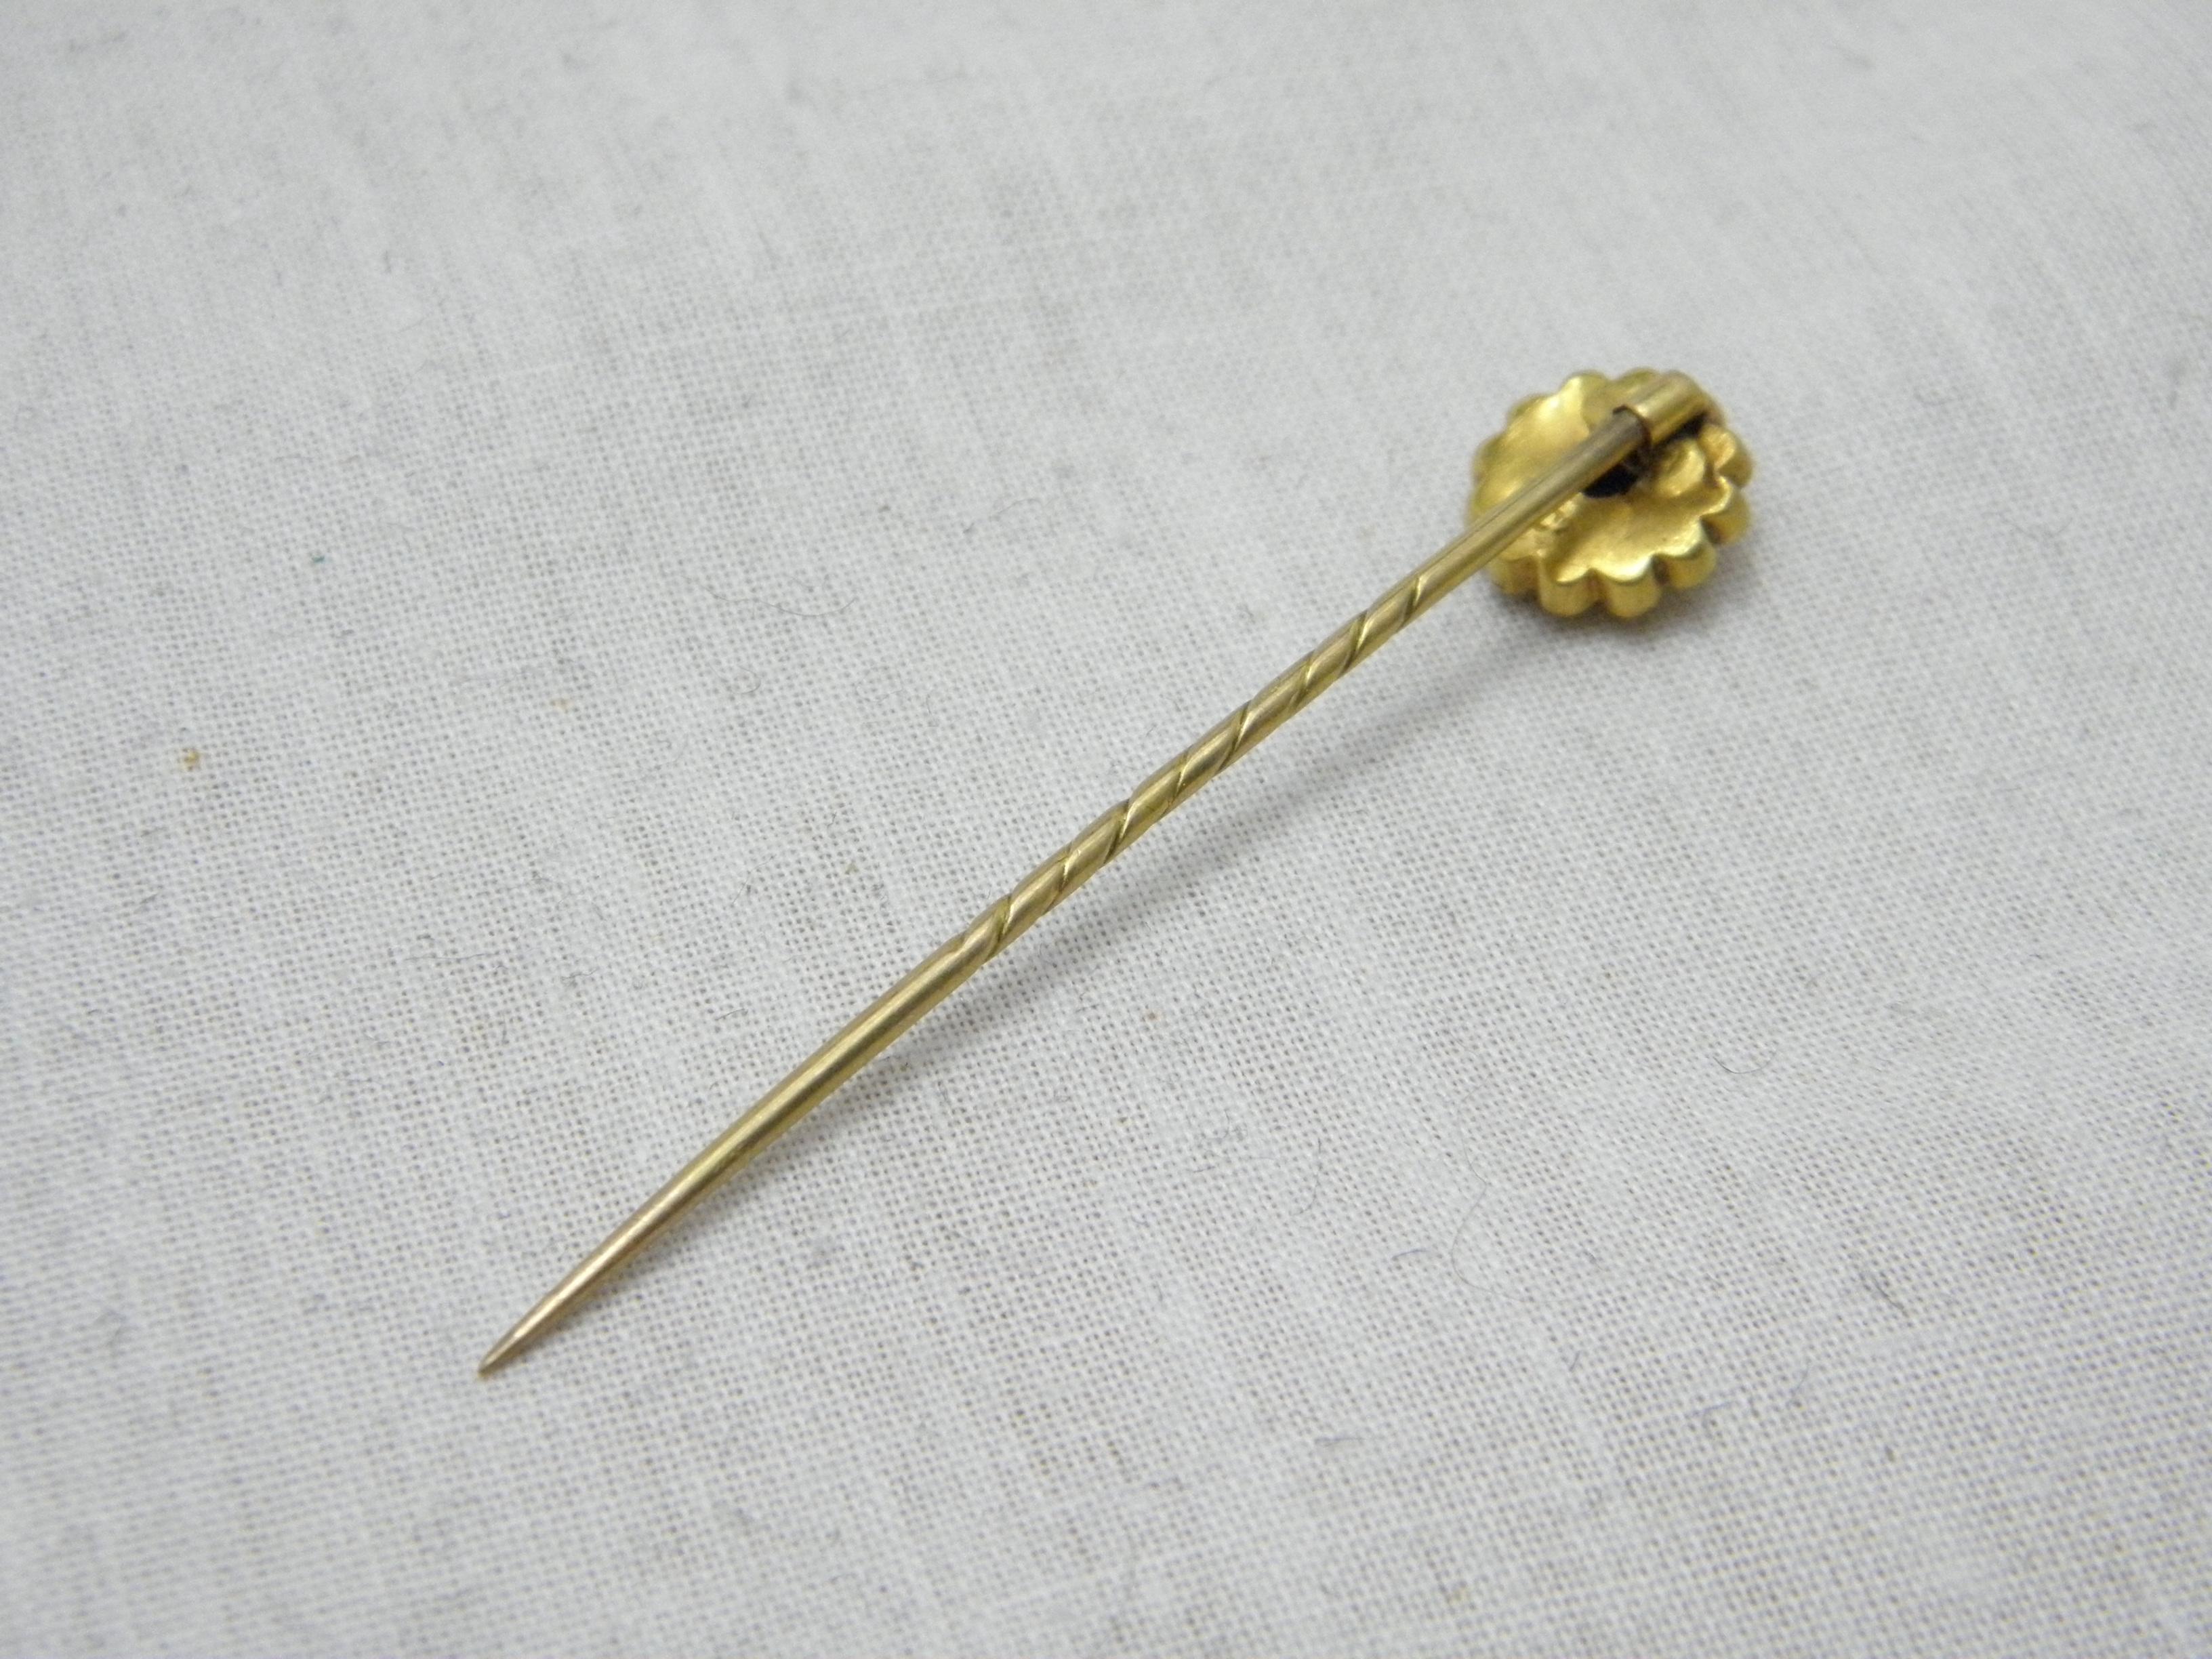 Antique 15ct Gold Diamond Stock Pin Brooch c1880 Heavy 625 Purity Tie Lapel Hat For Sale 2